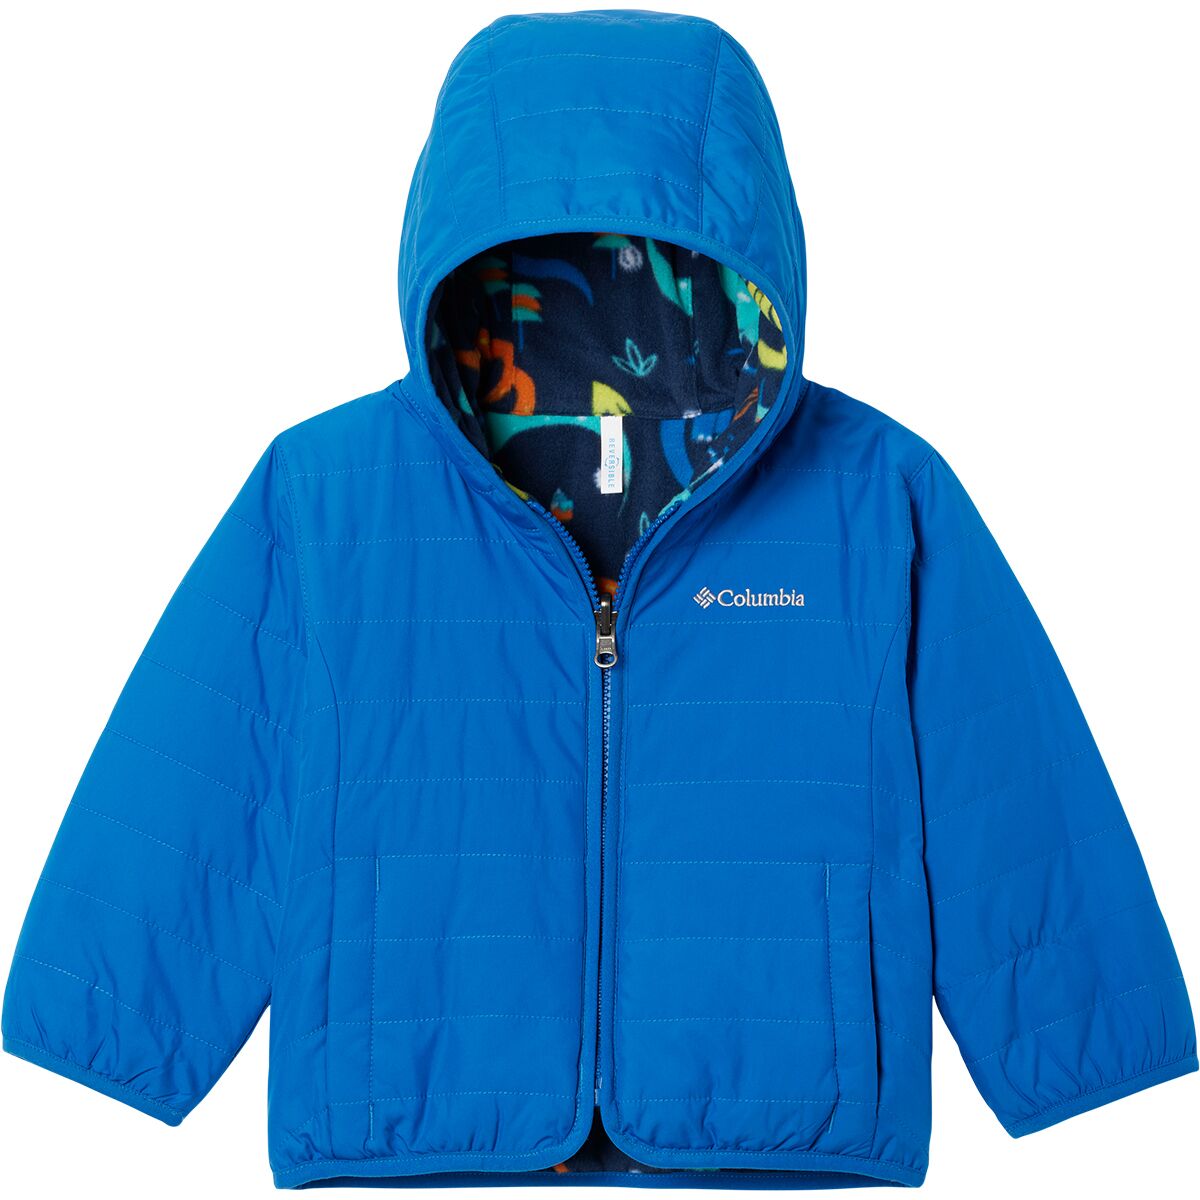 Columbia Double Trouble Jacket - Toddlers'